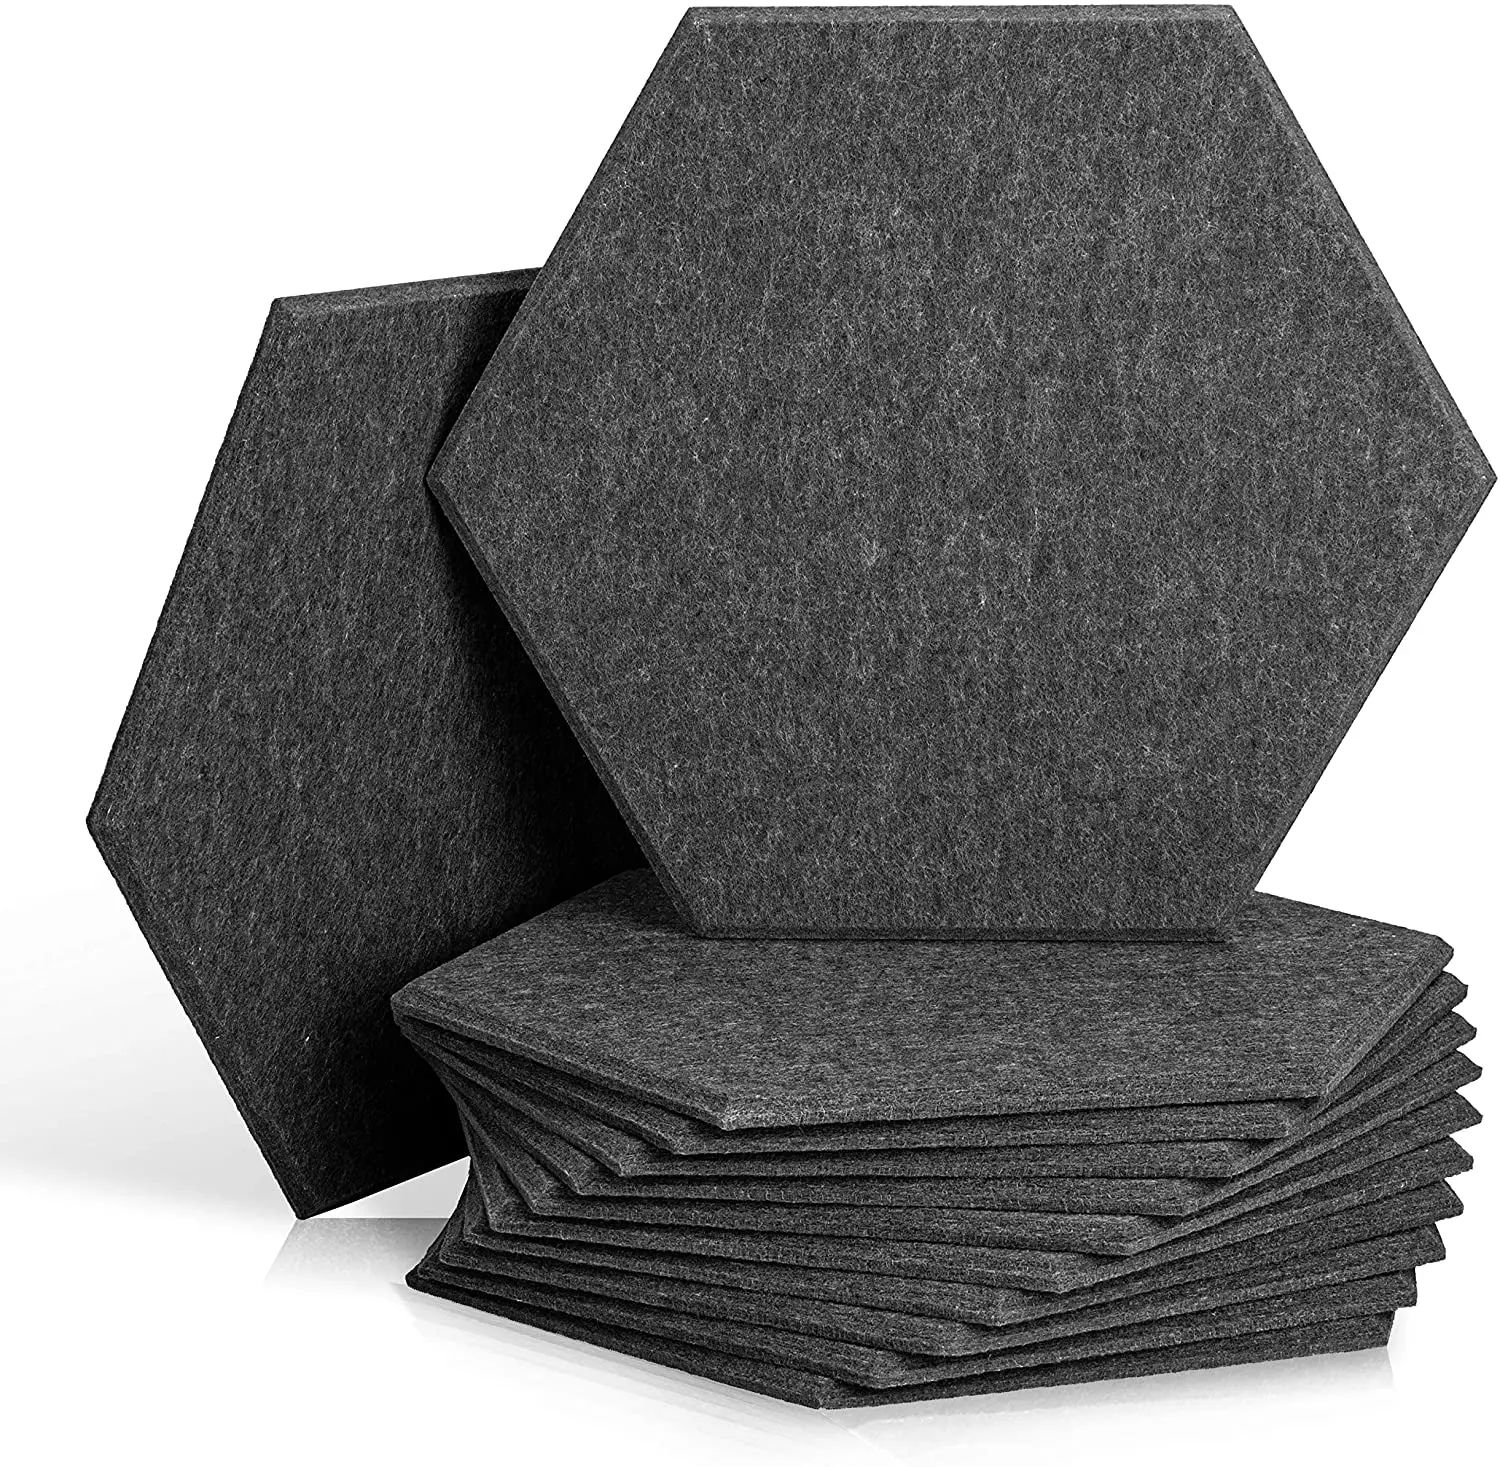 

2022 New Style Soundproofing Foam Hexagon PET Acoustic Wall Panels Used in Home And Offices